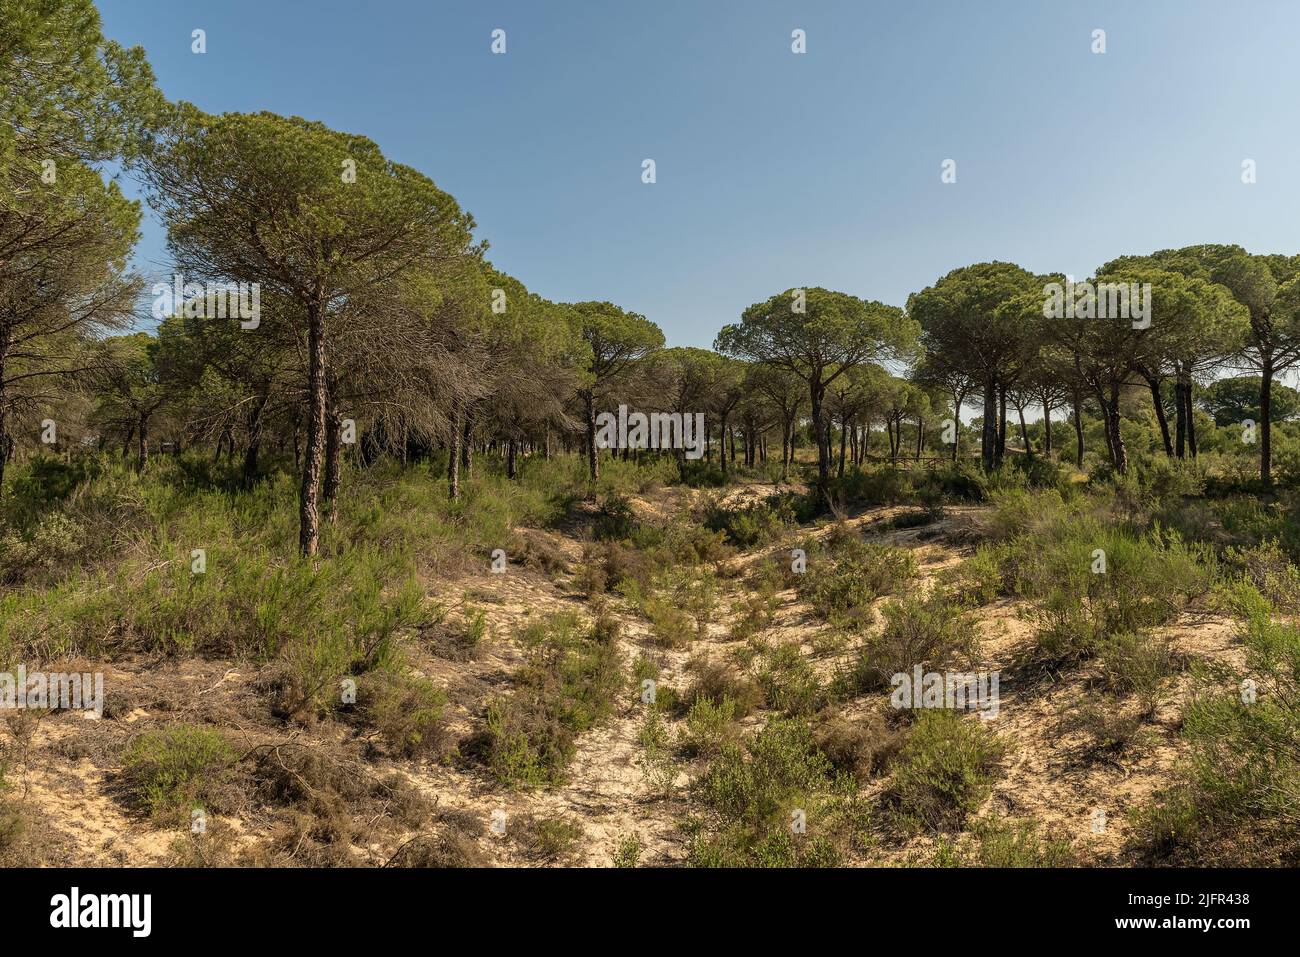 Landscape of Donana National Park in Andalusia, Spain Stock Photo